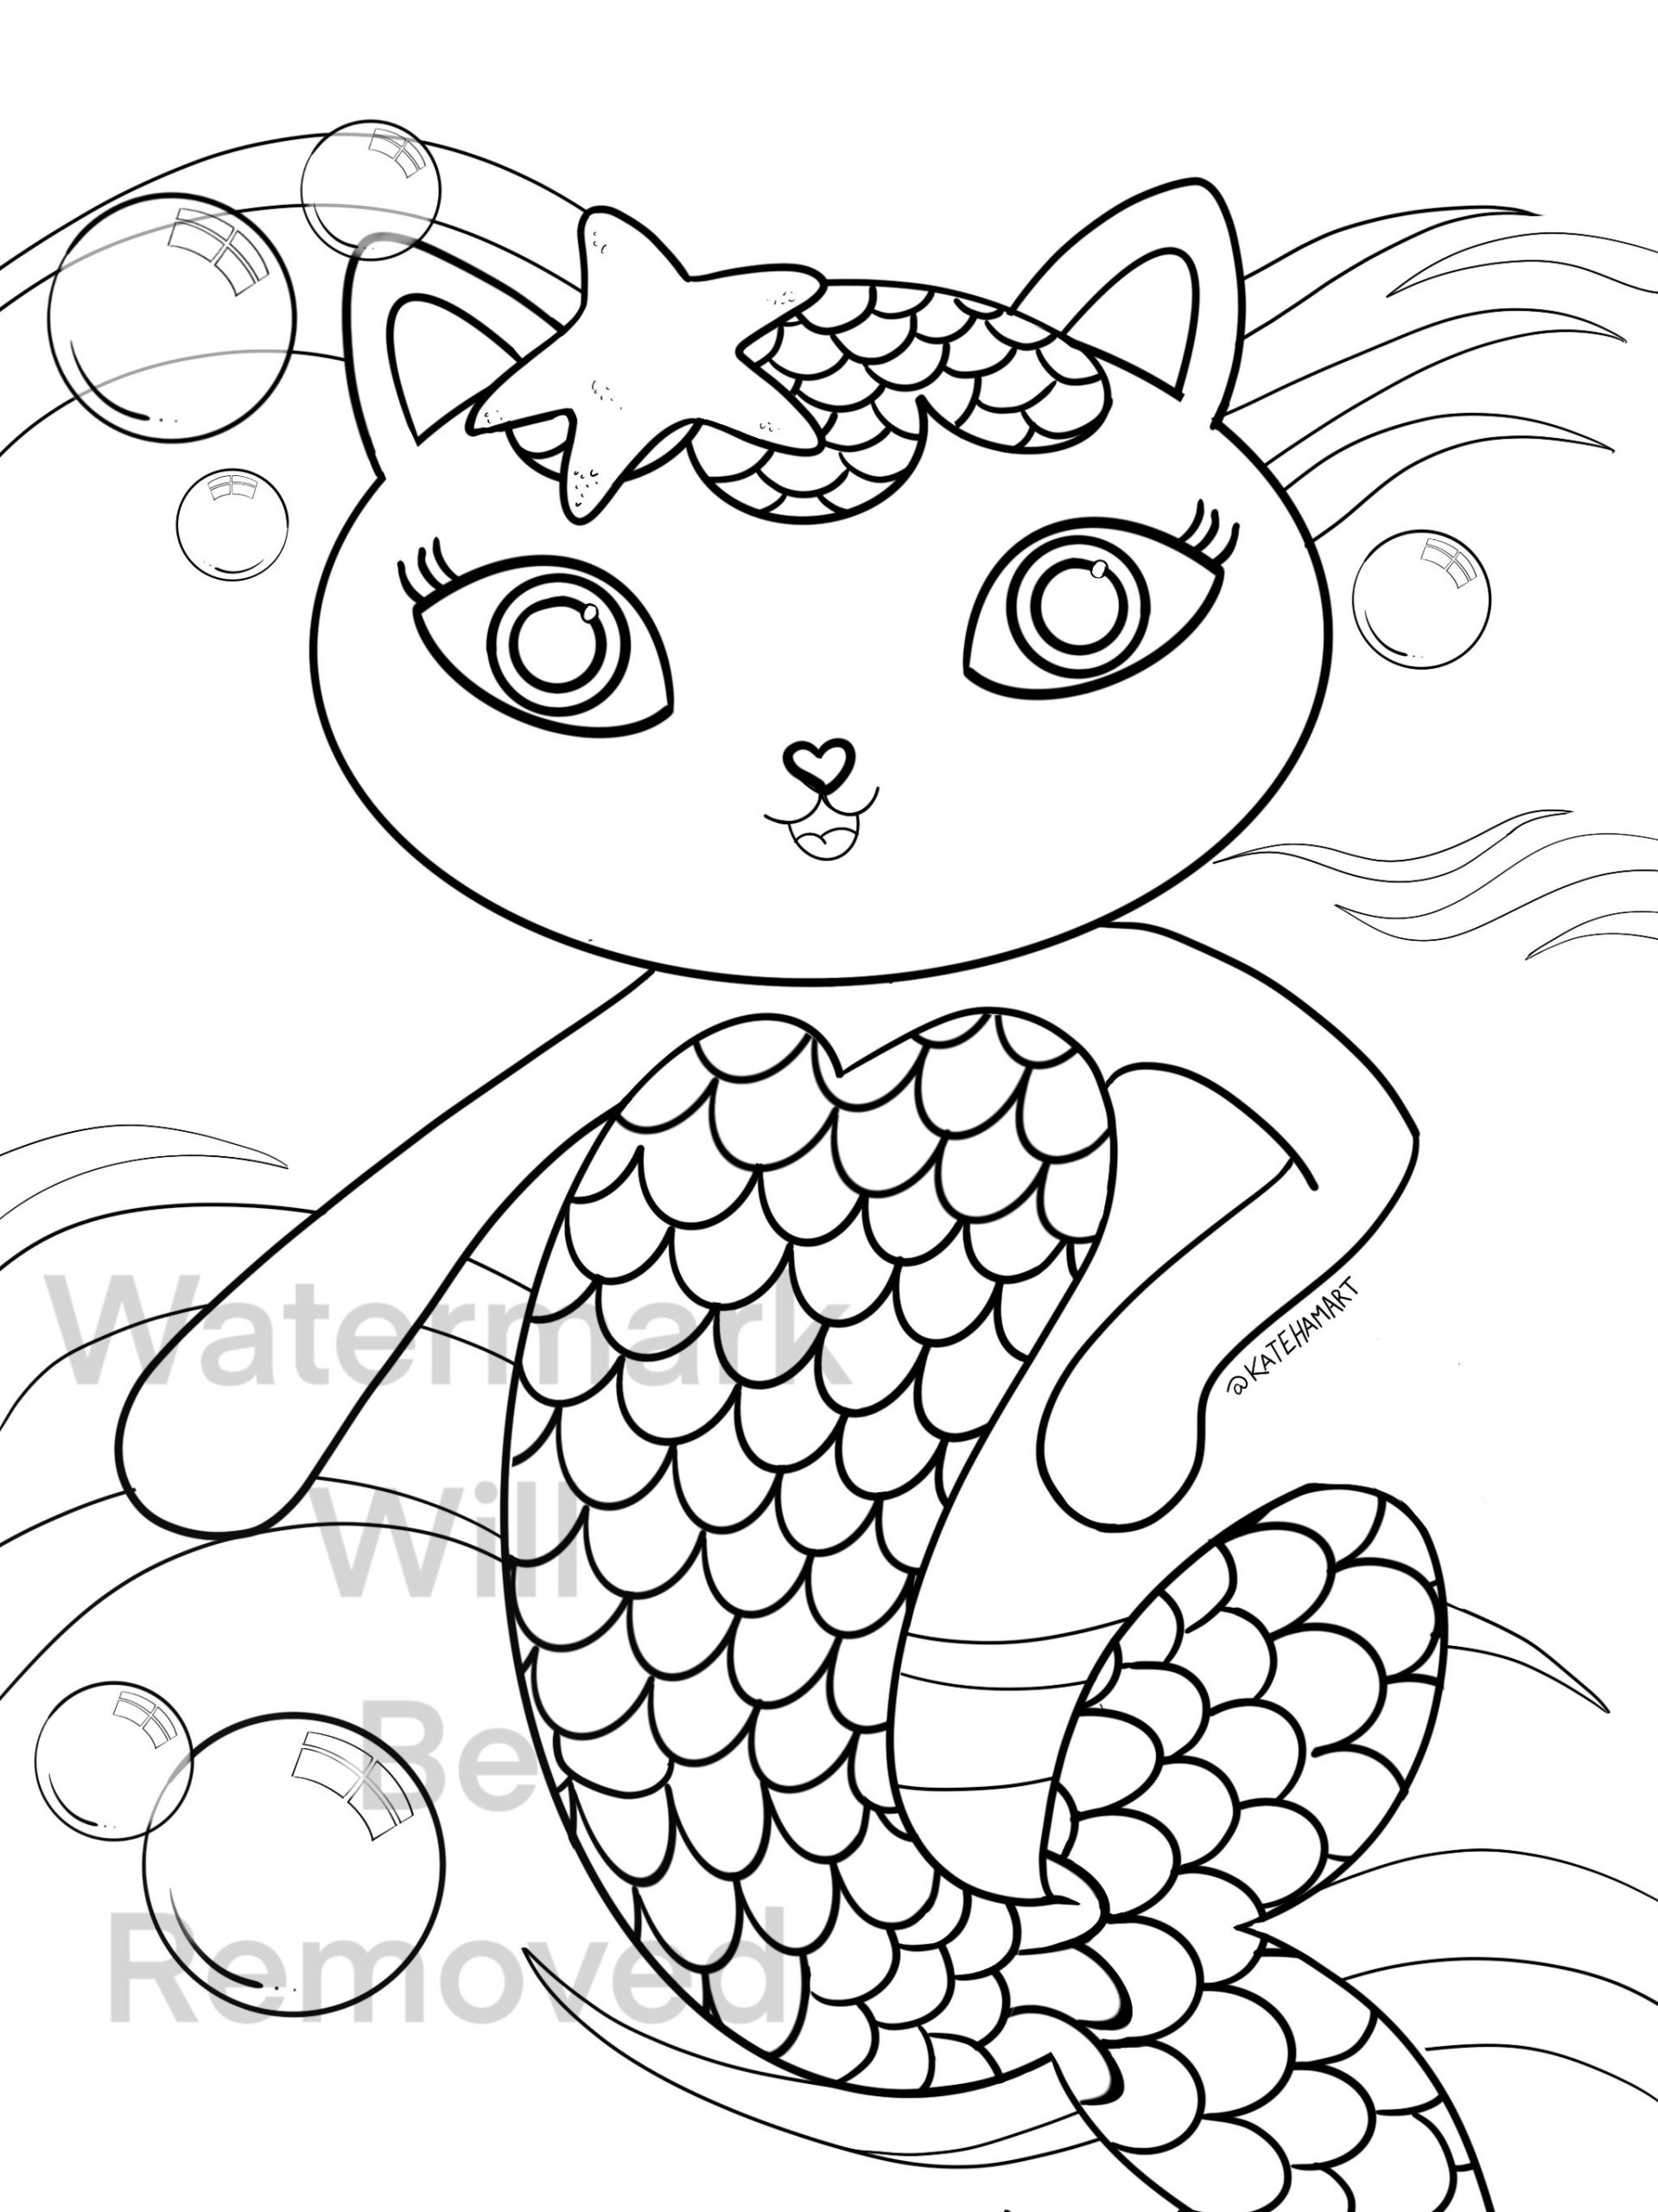 Gabby's Dollhouse Printable Coloring Activity Sheets